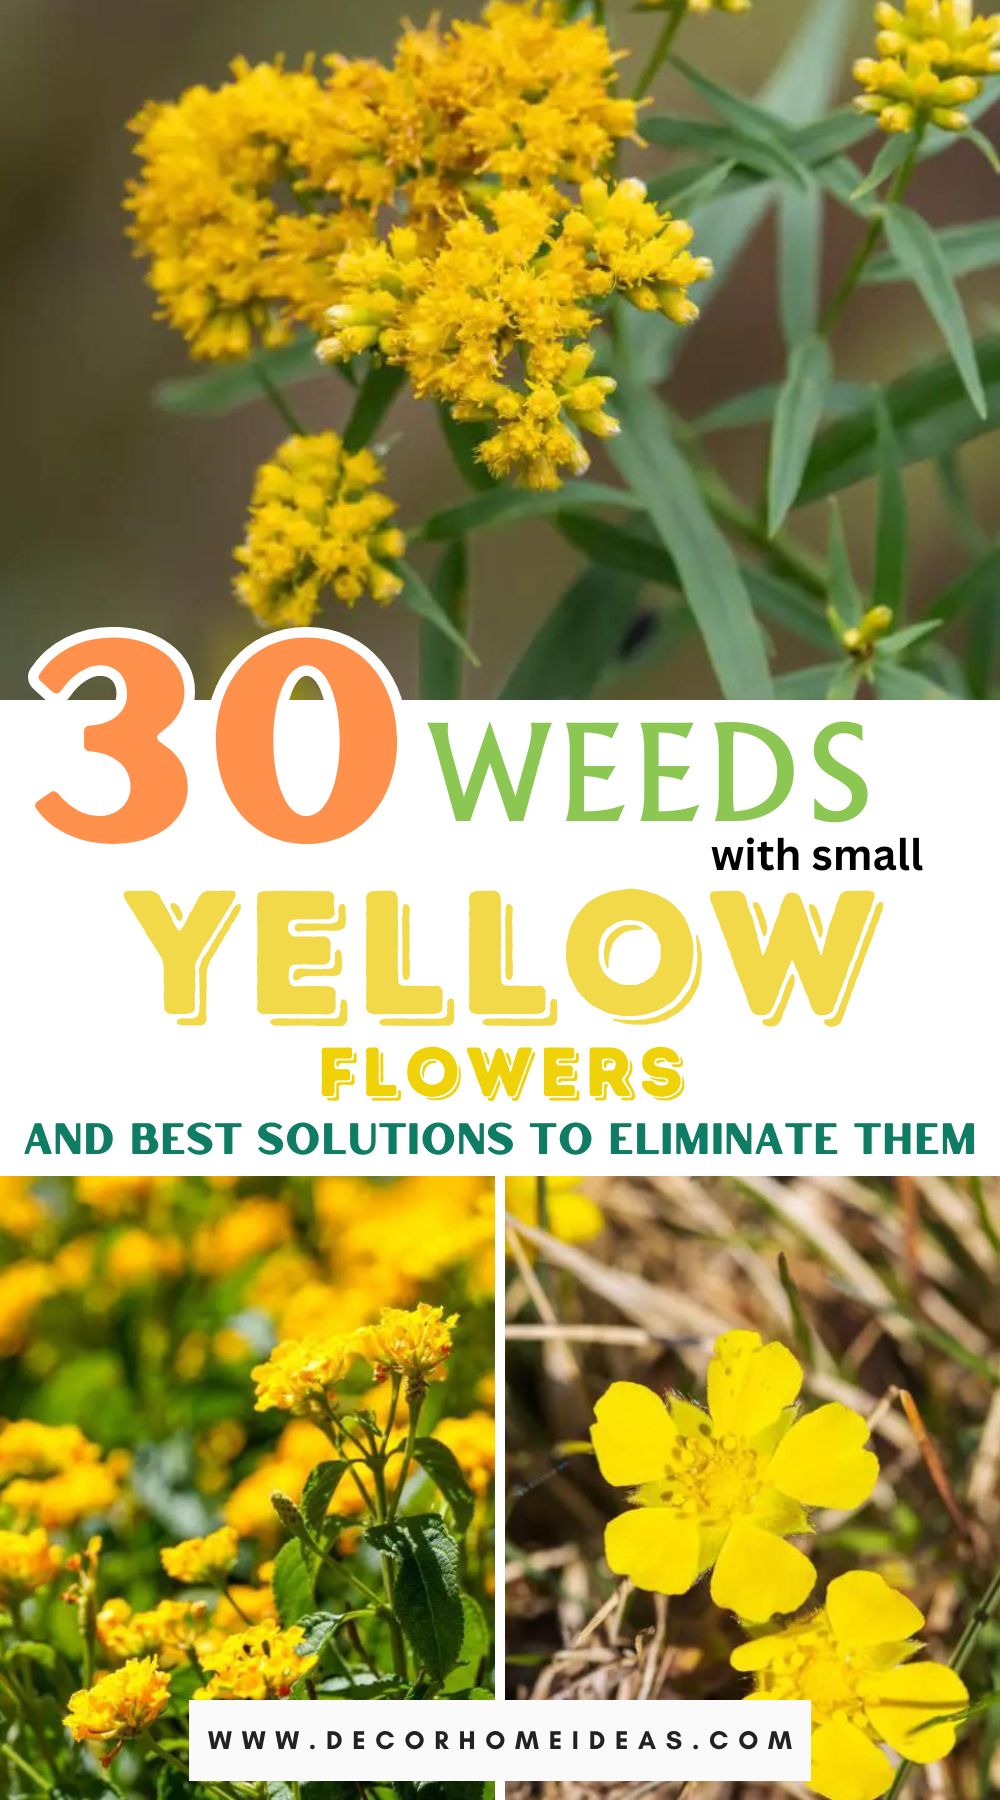 Tackle those pesky weeds with tiny yellow flowers! Explore 30 common varieties and discover the best solutions for effective elimination in your garden.